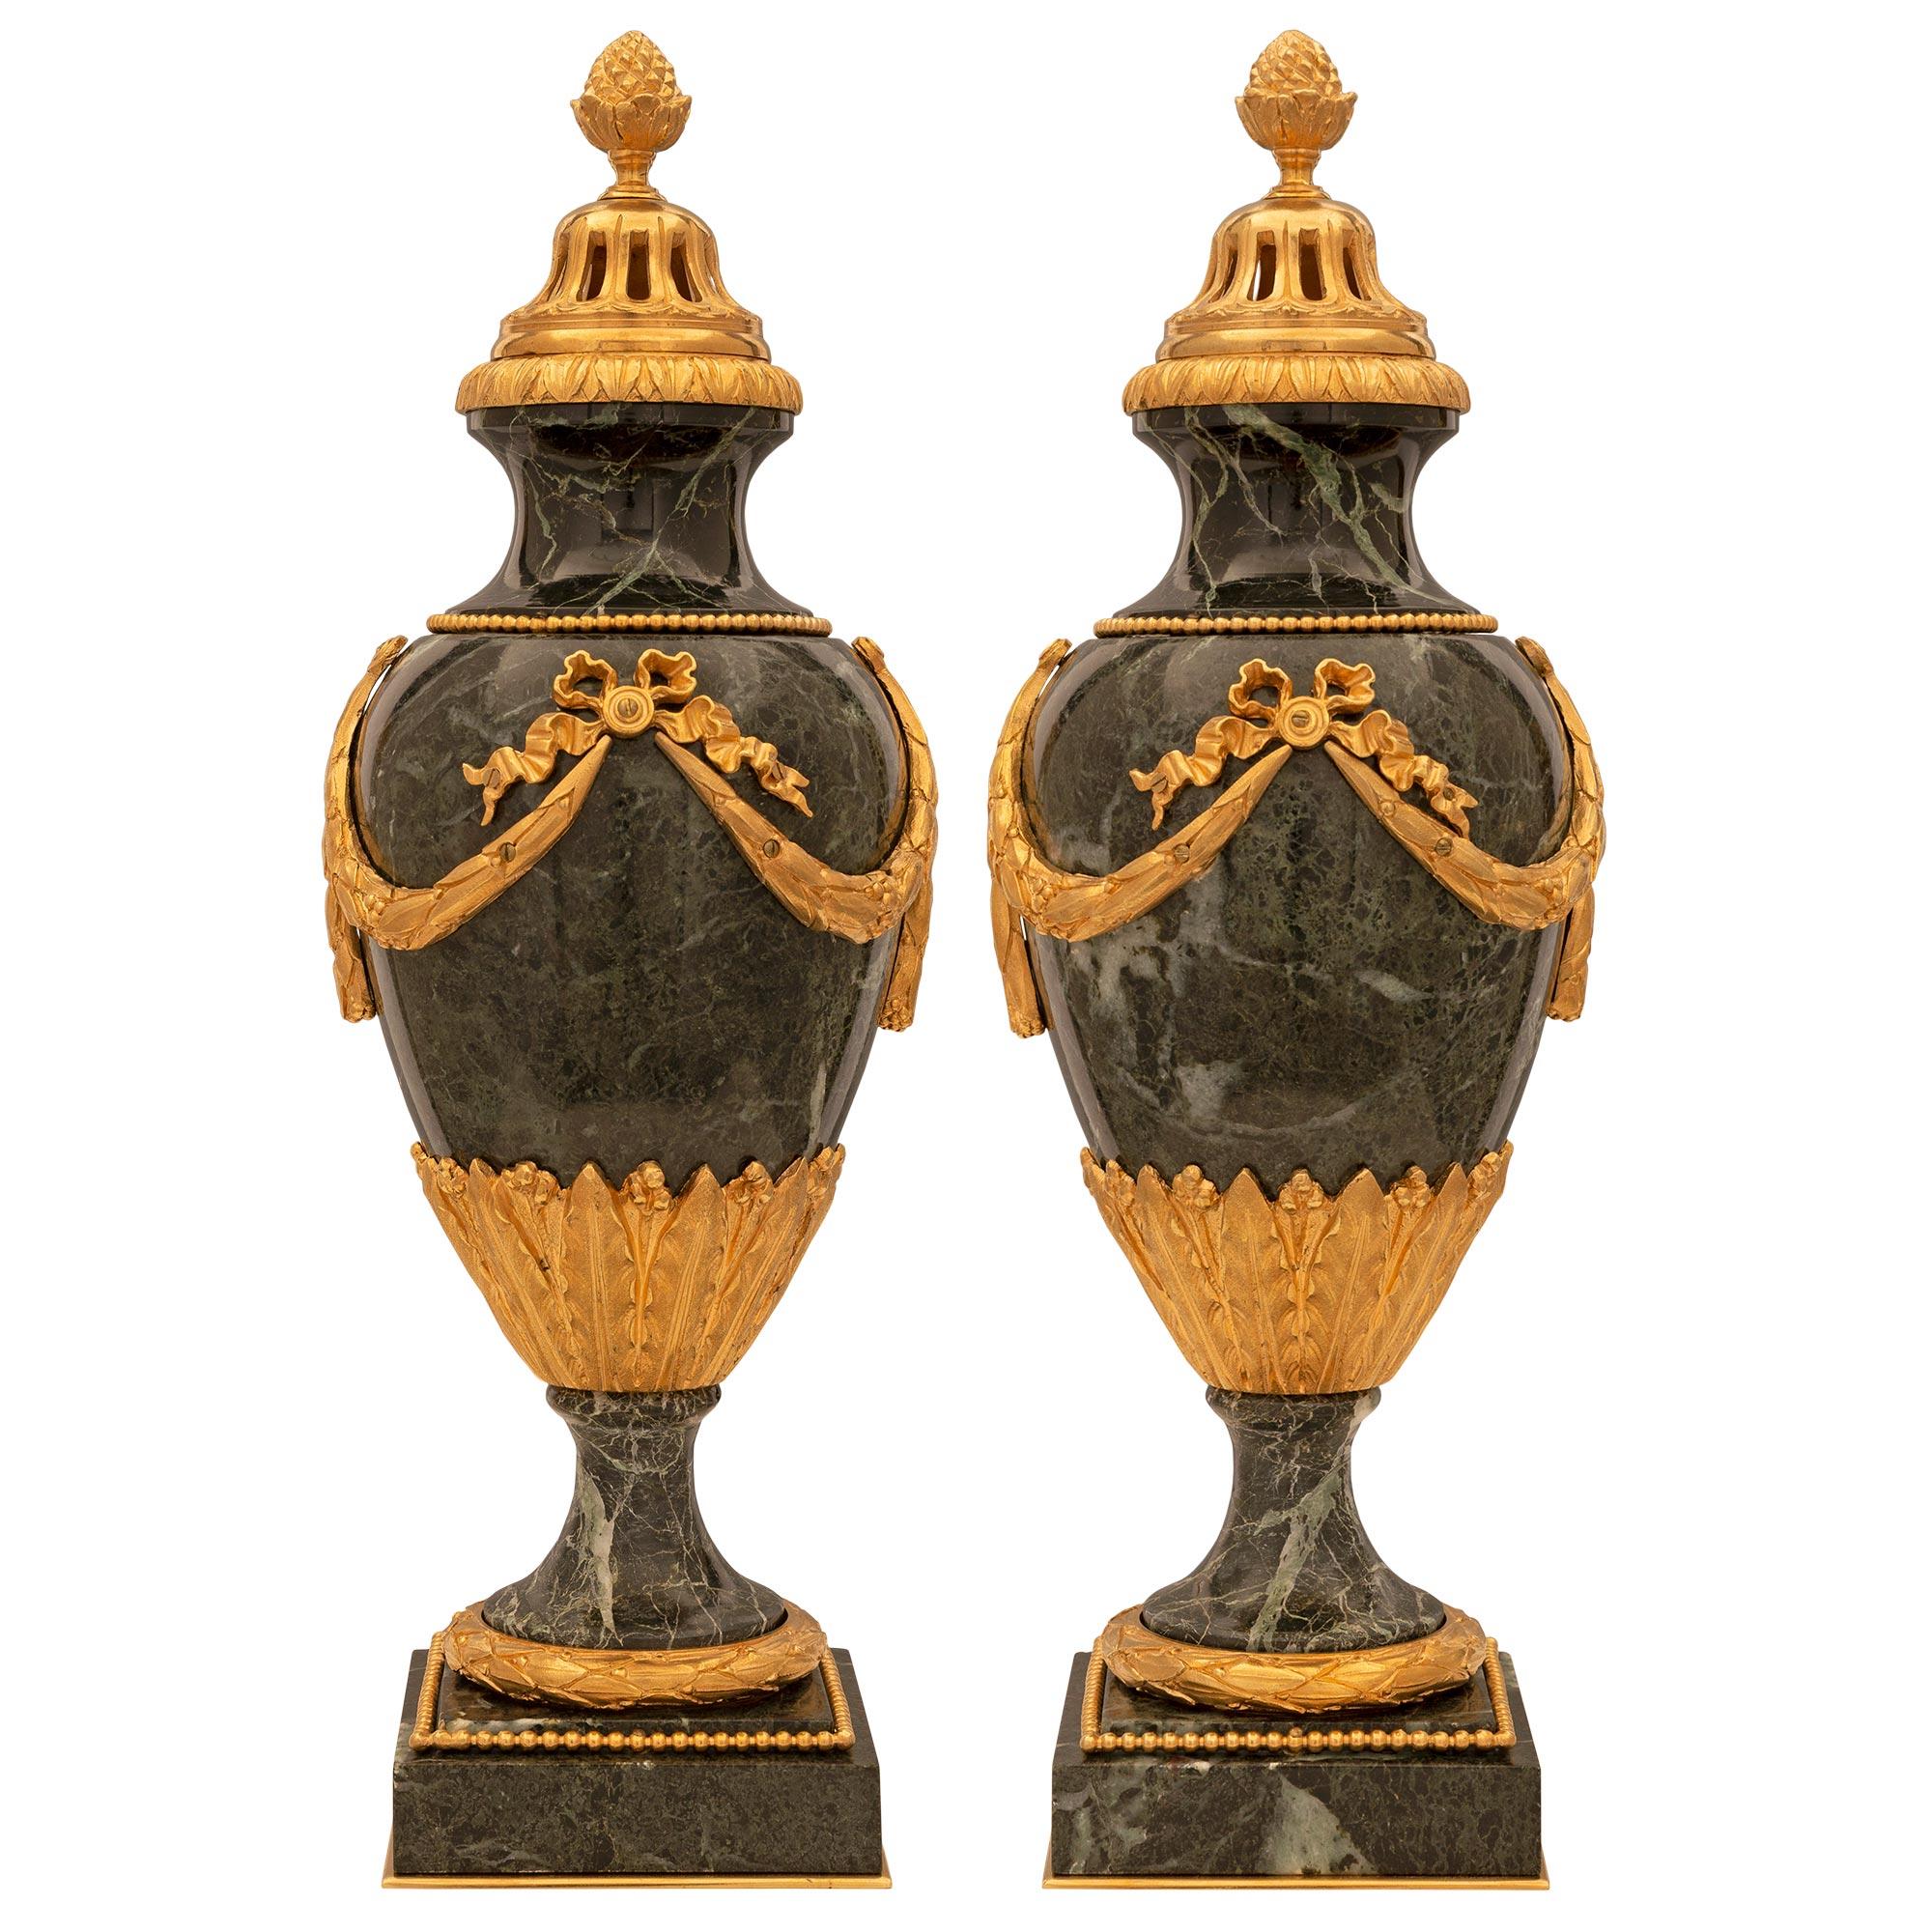 Pair of French 19th Century Louis XVI Style Marble and Ormolu Lidded Urns For Sale 7